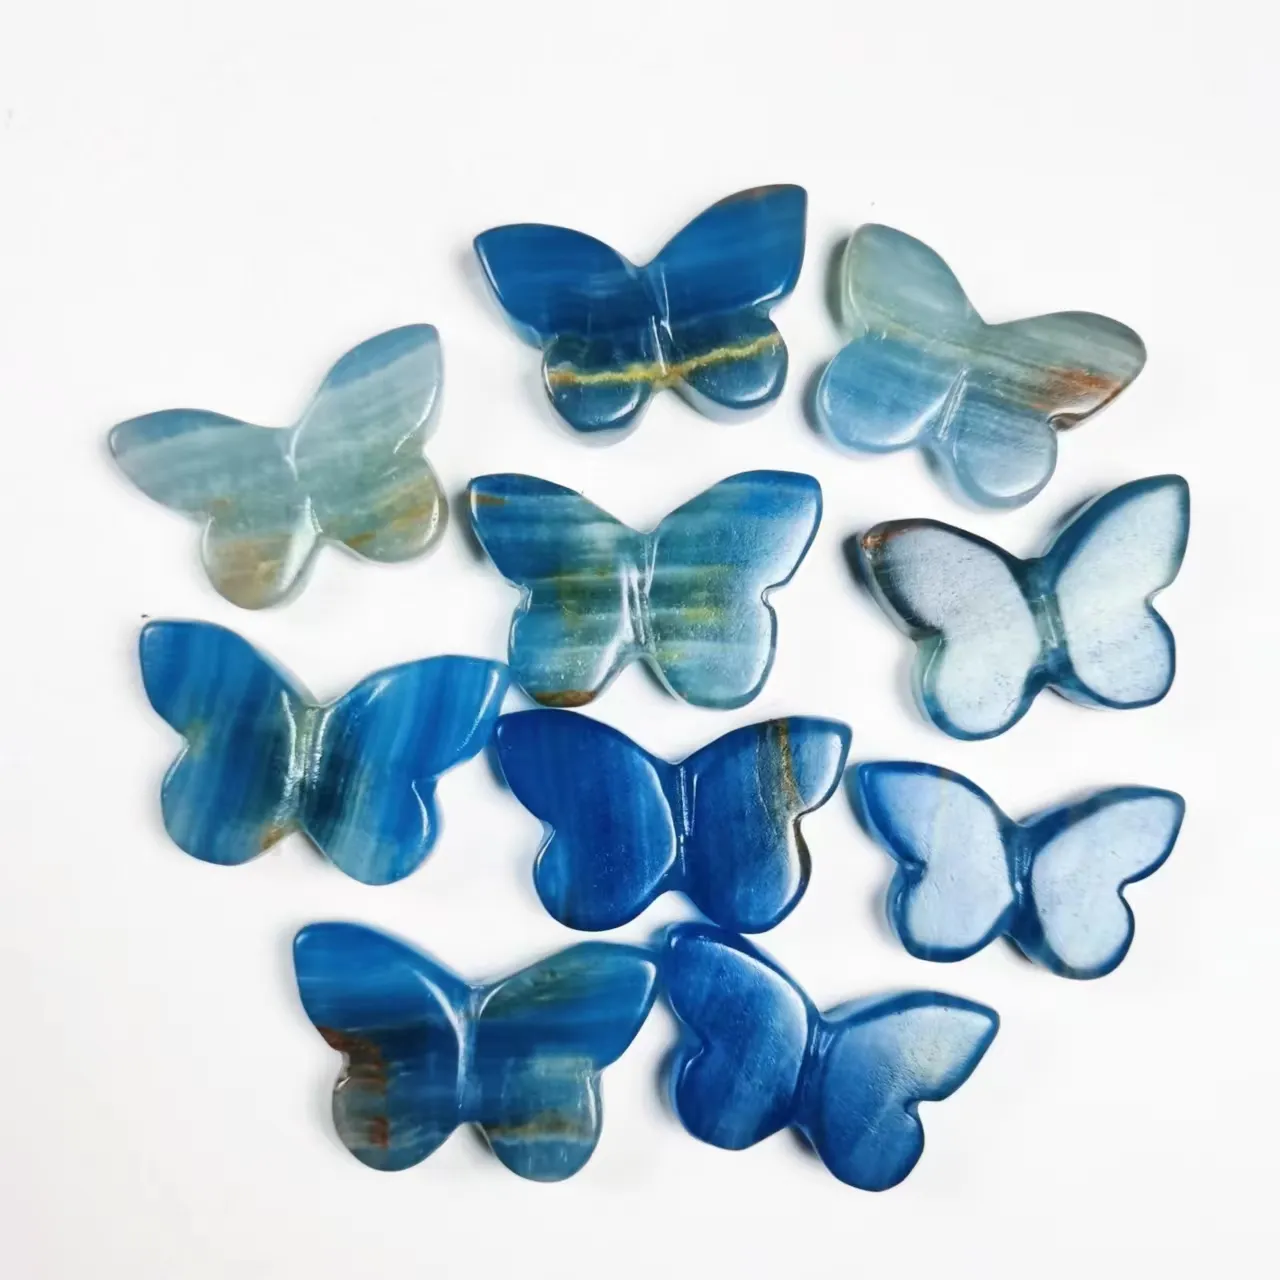 3.5-5cm Butterfly Natural Crystal Carving Crafts Blue Onyx Butterfly For Home Decor